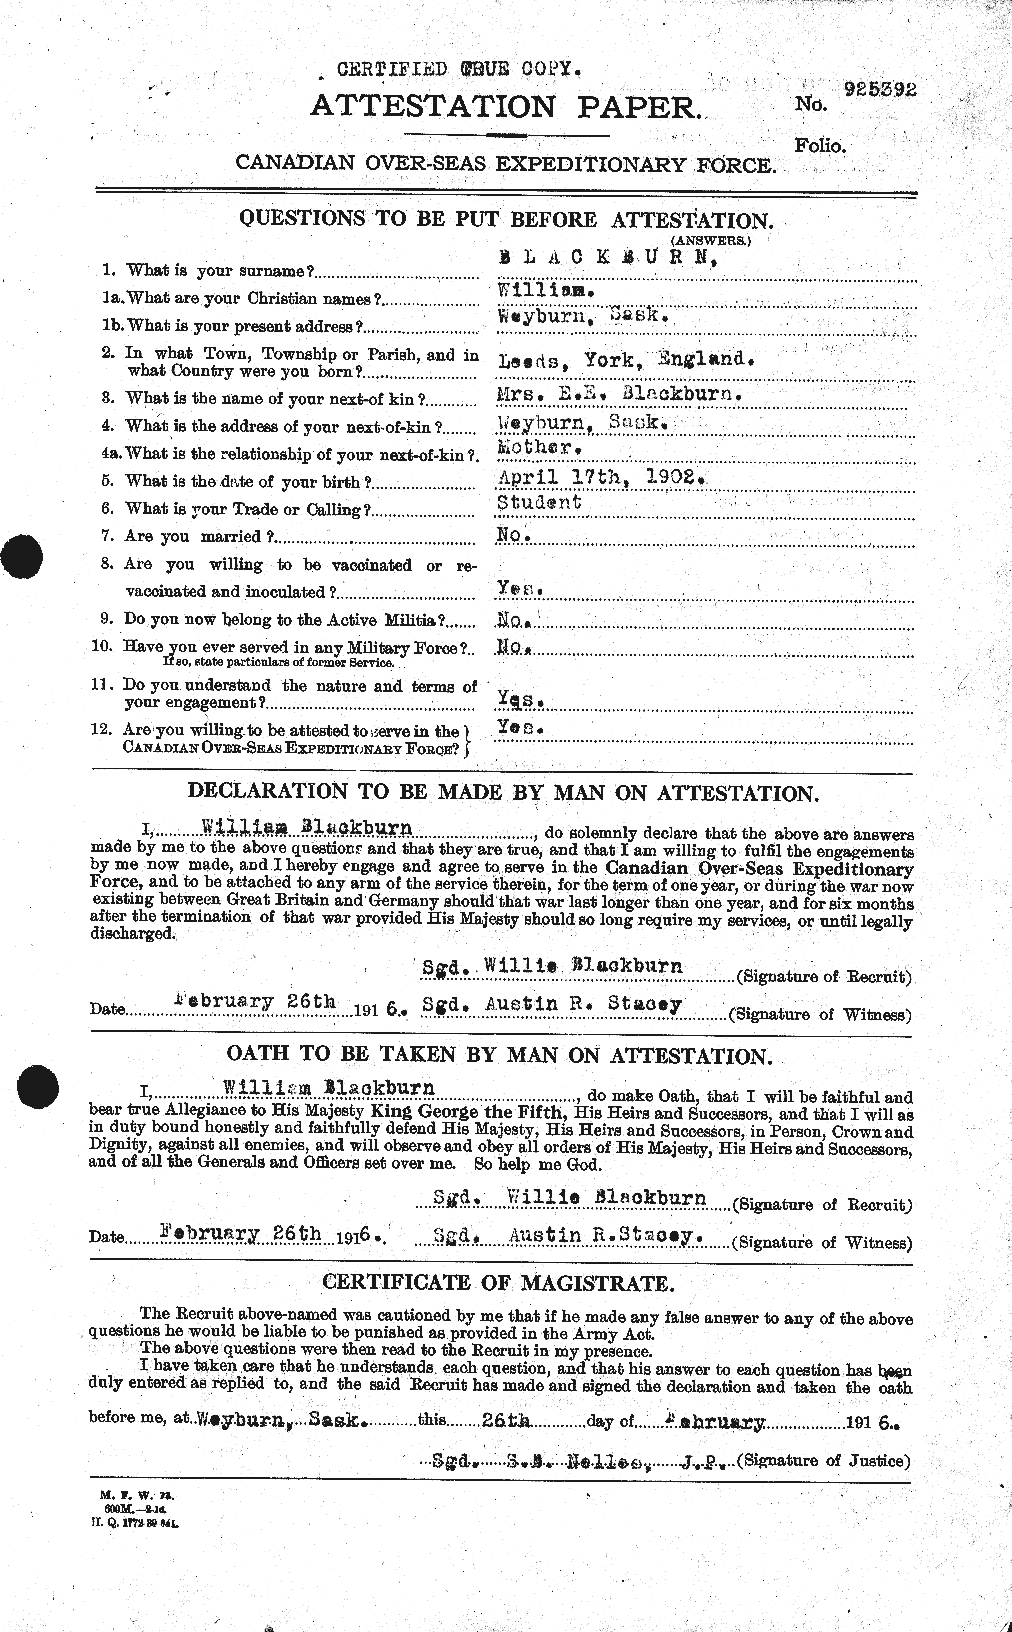 Personnel Records of the First World War - CEF 246427a